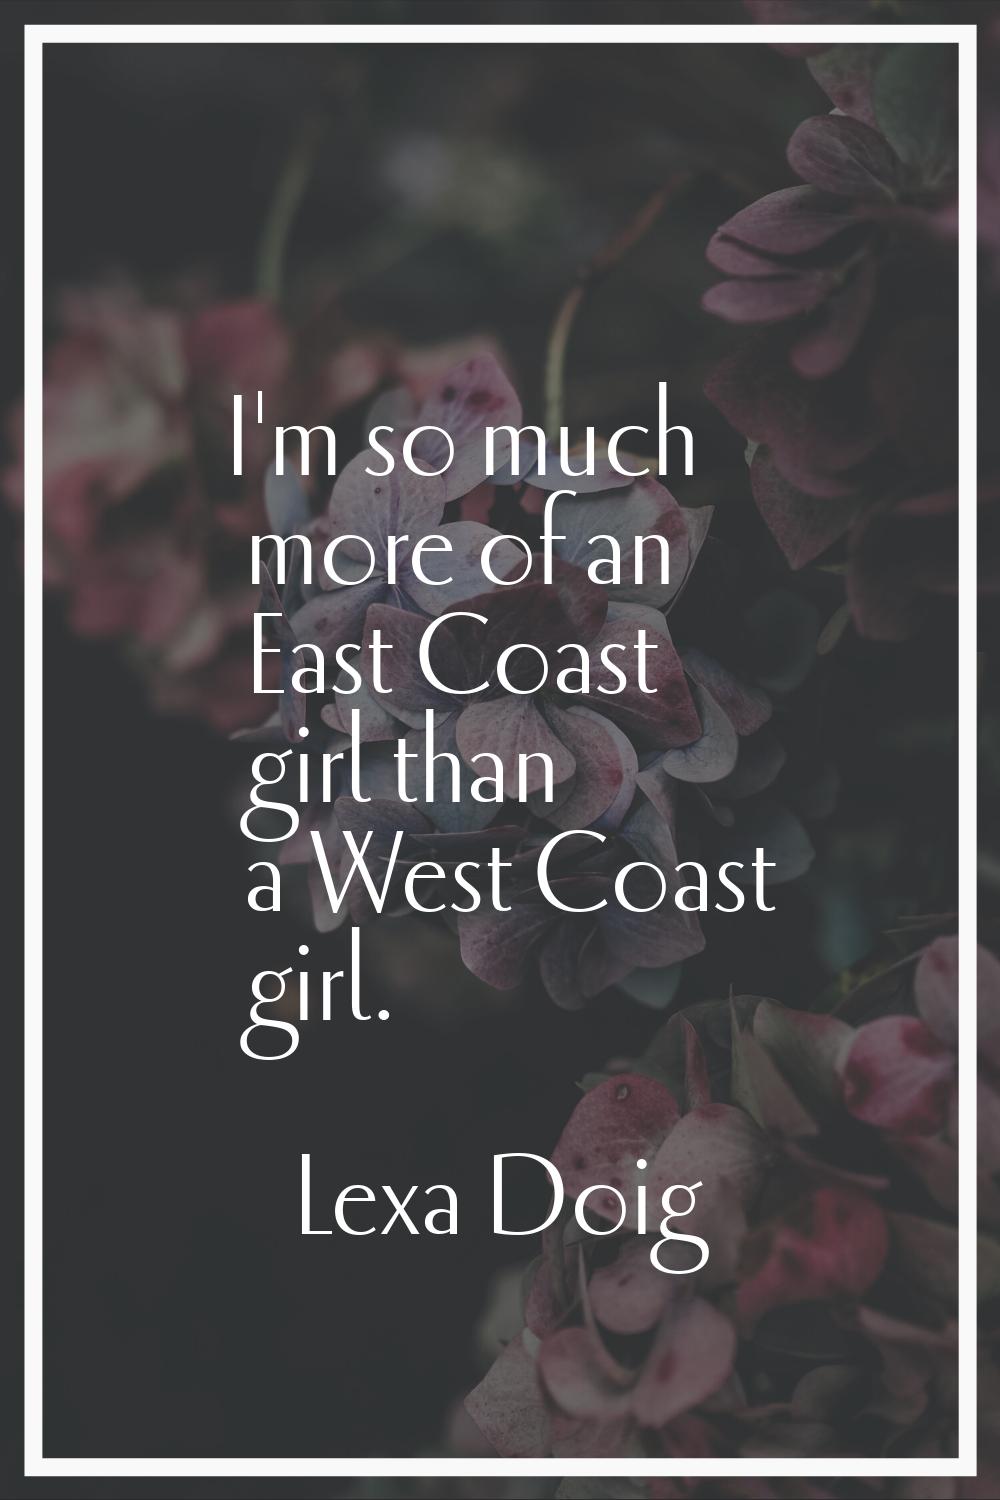 I'm so much more of an East Coast girl than a West Coast girl.